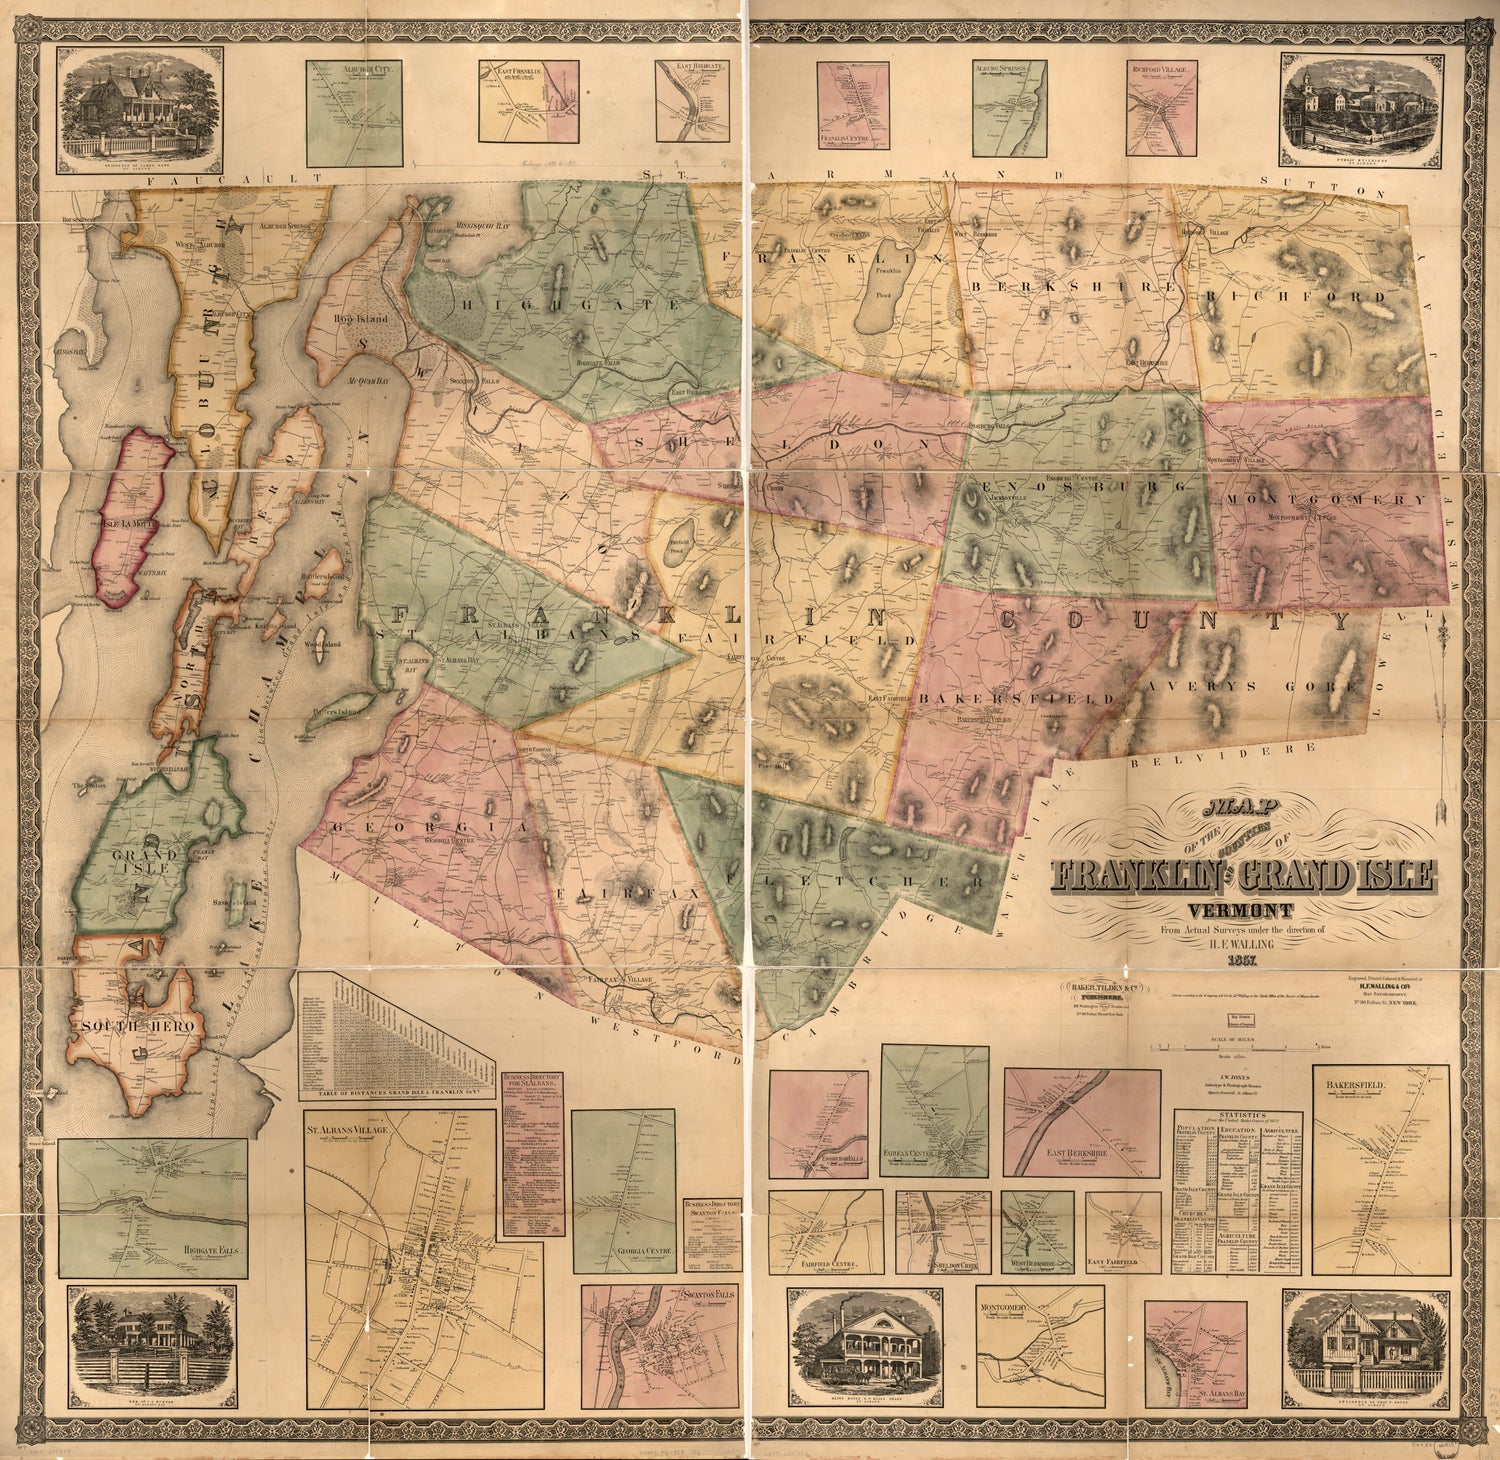 This old map of Map of the Counties of Franklin and Grand Isle, Vermont : from Actual Surveys from 1857 was created by Tilden &amp; Co Baker, Henry Francis Walling in 1857